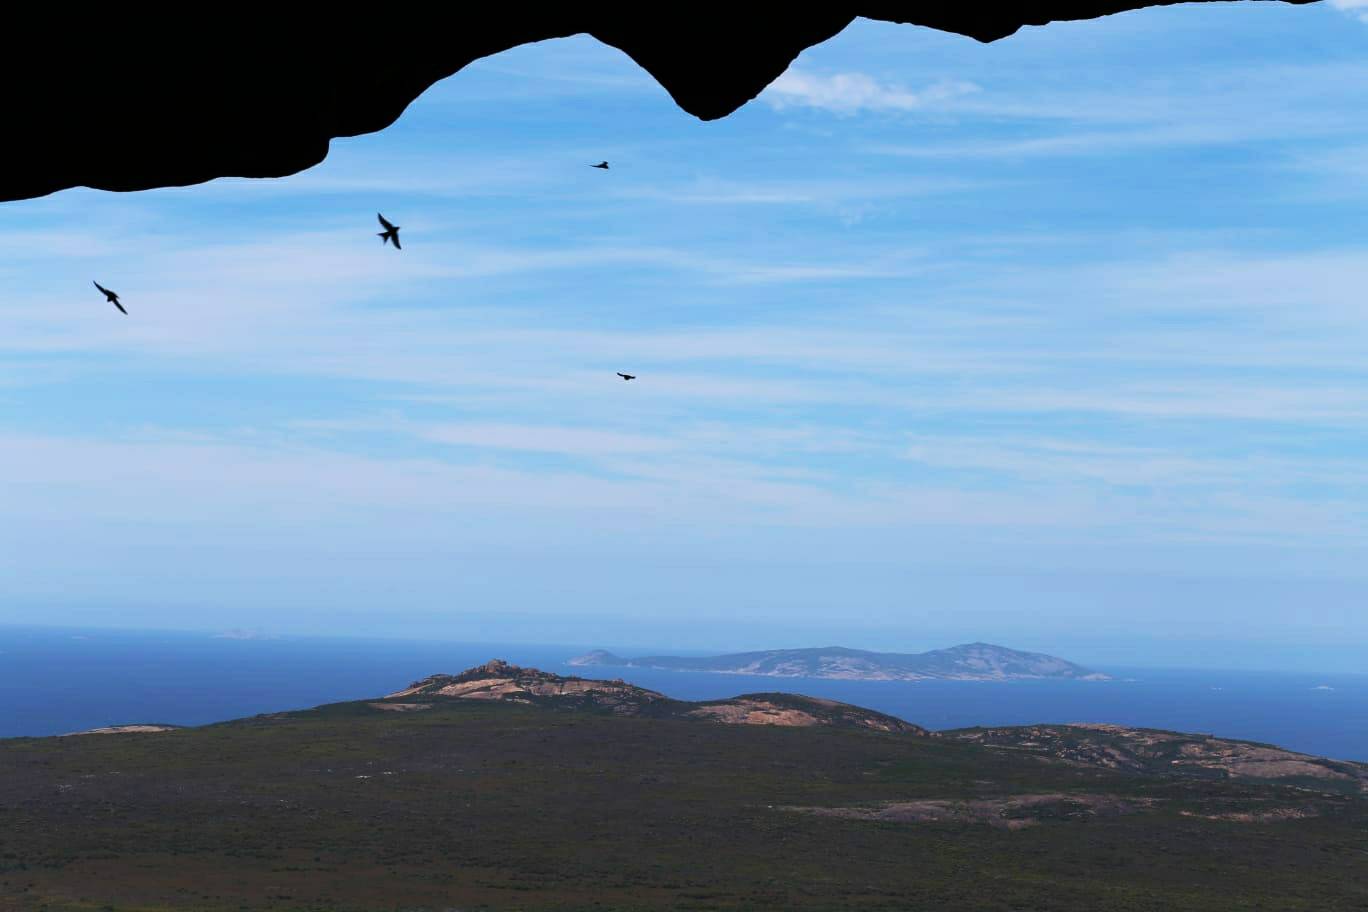 View from the cave at Frenchman Peak